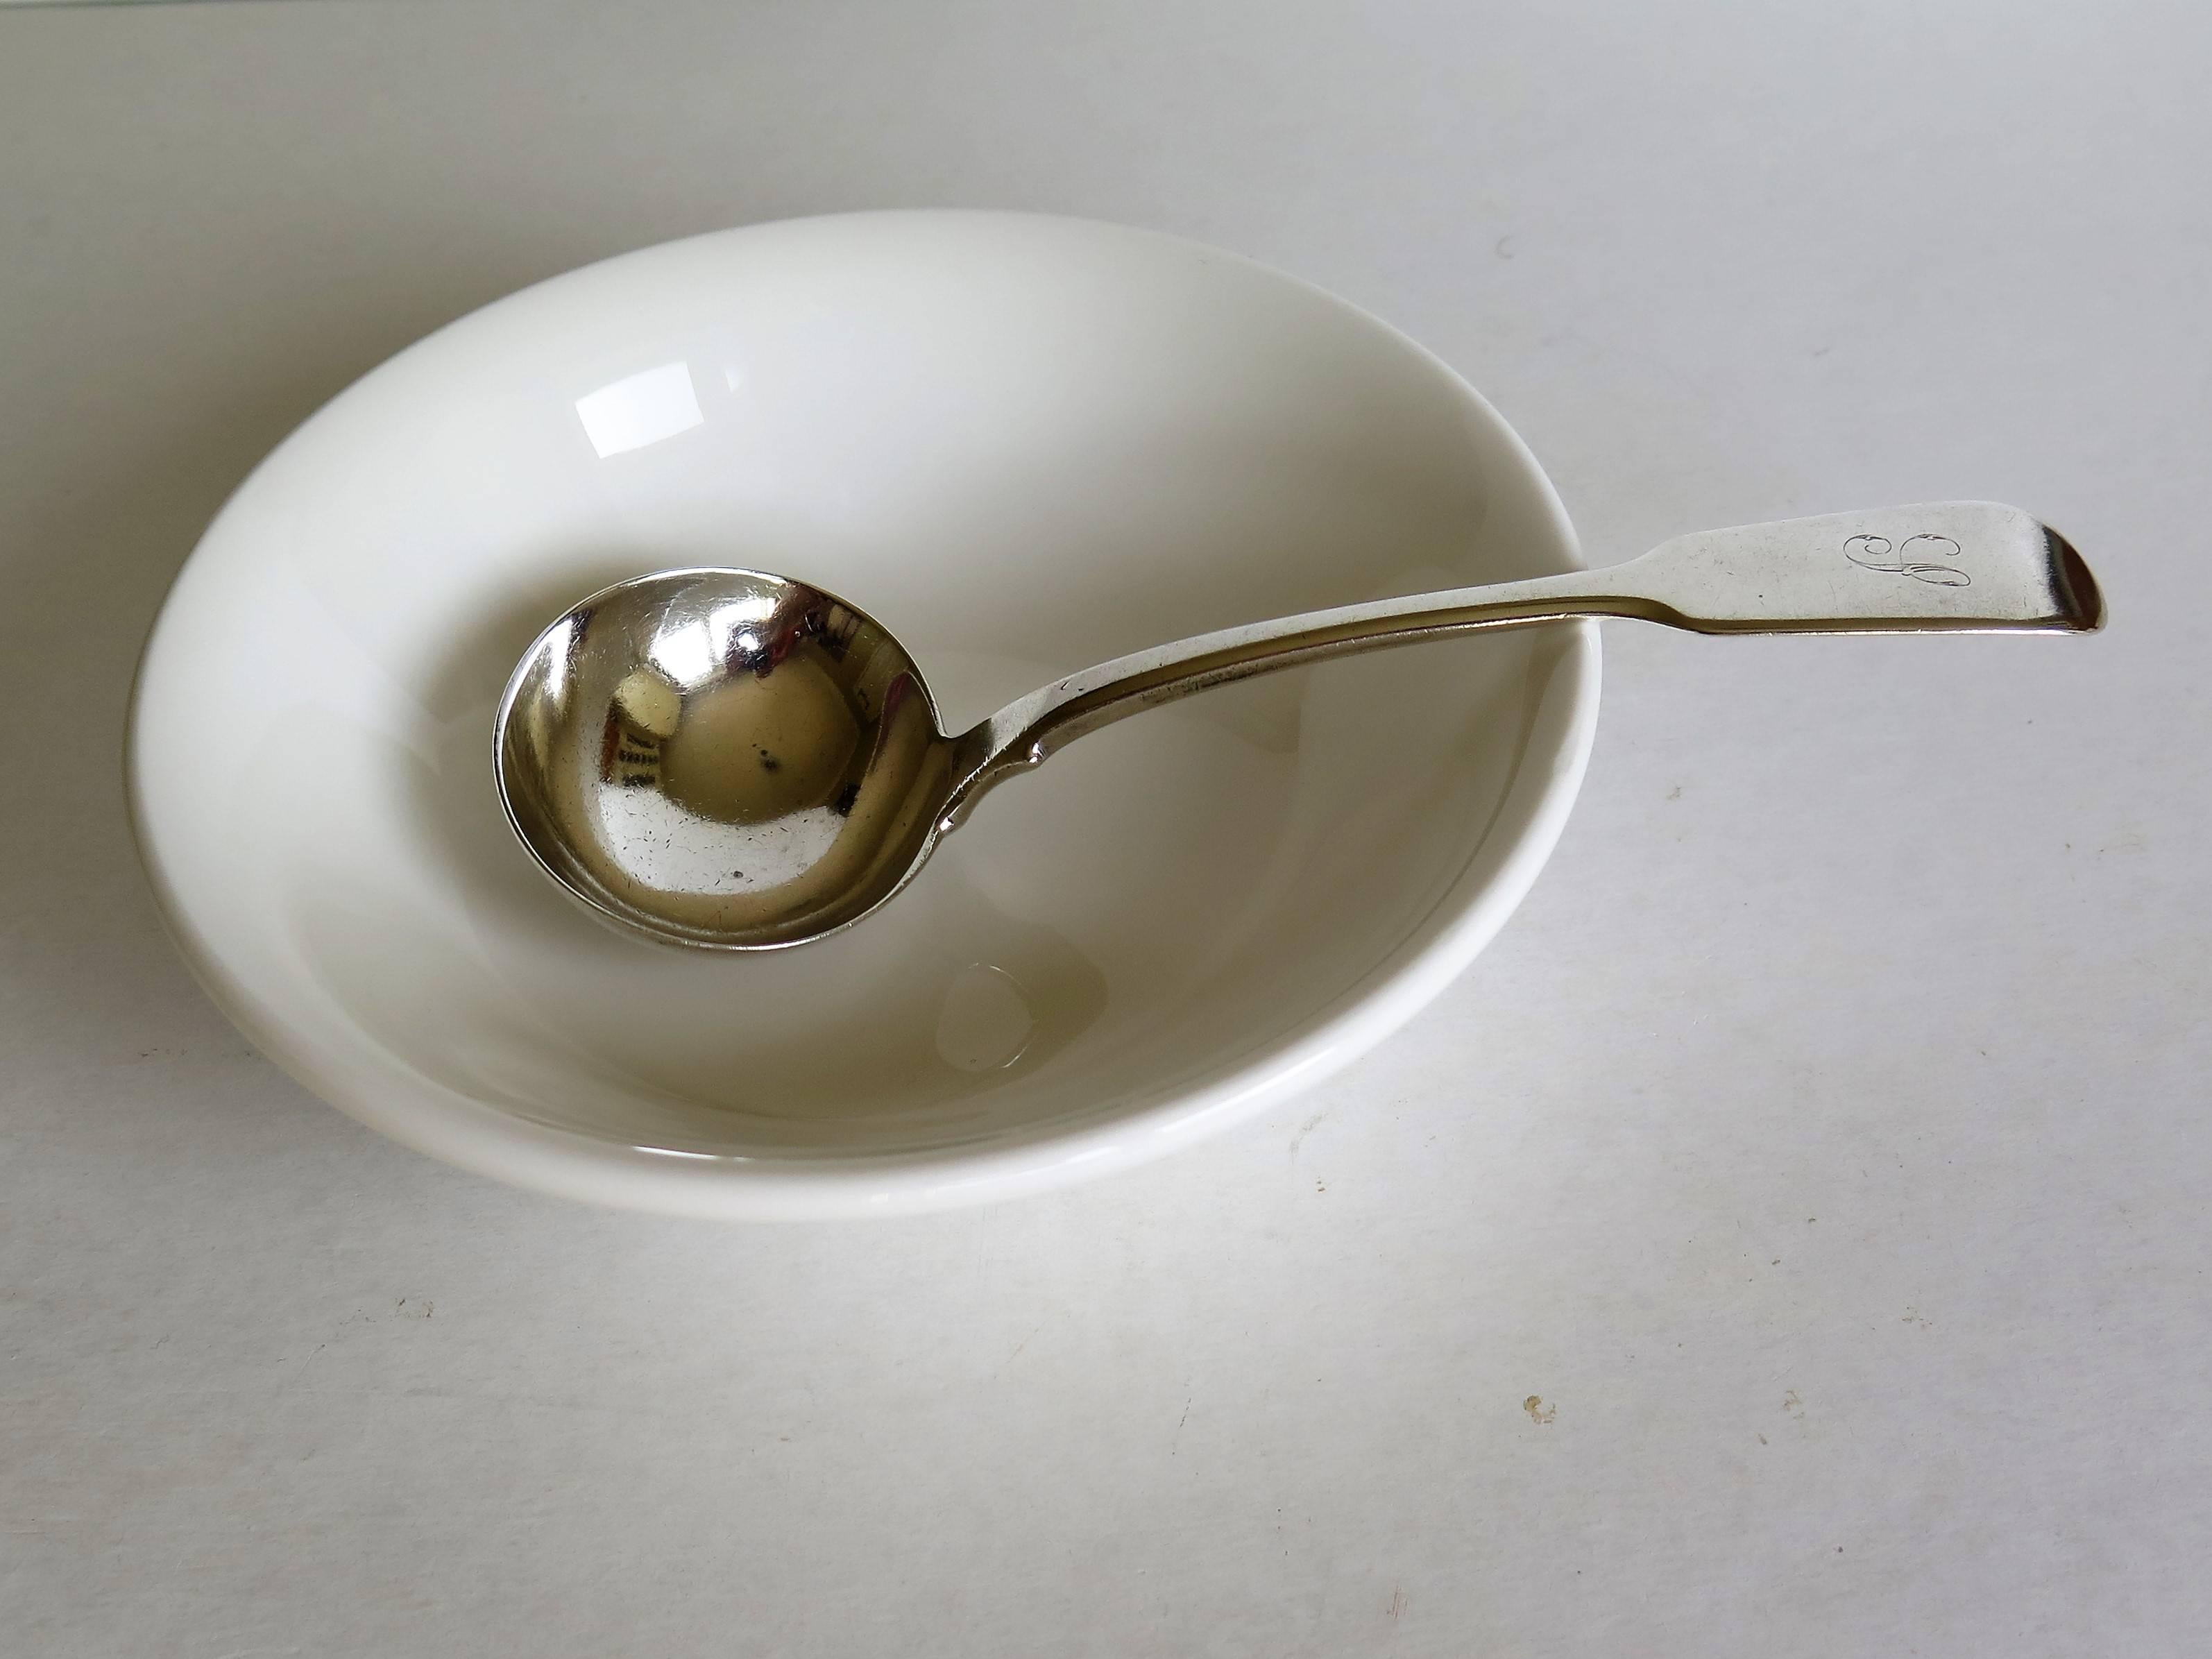 London 1838 Sterling Silver Sauce Ladle or Fiddle Back Spoon by Charles Boyton In Good Condition For Sale In Lincoln, Lincolnshire